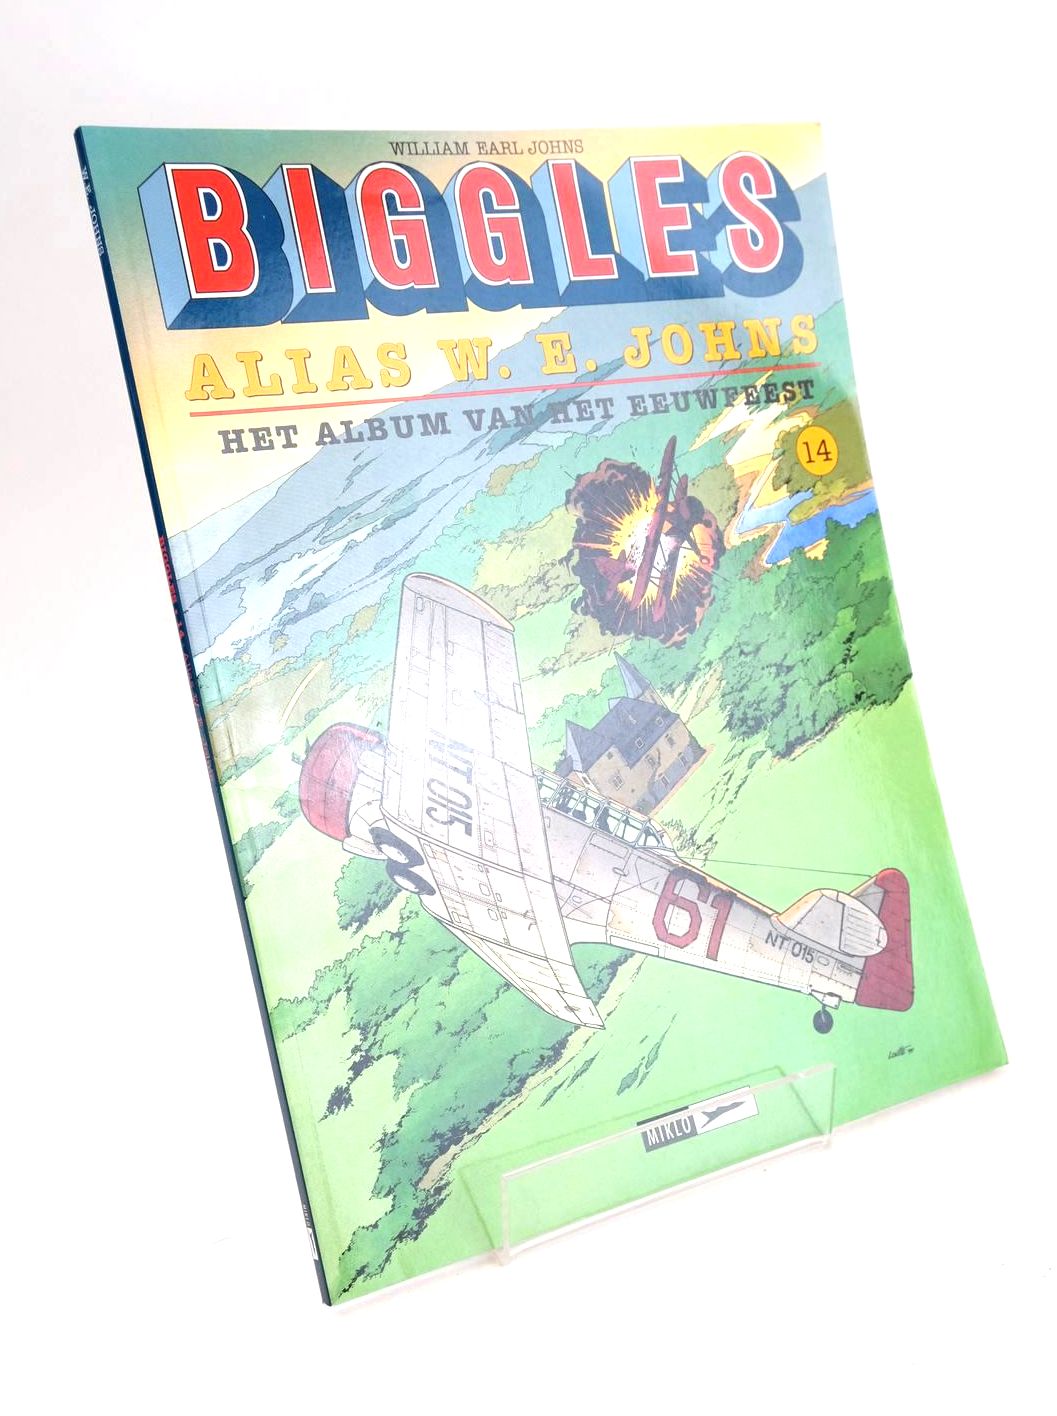 Photo of BIGGLES ALIAS W.E. JOHNS HET ALBUM VAN HET EEUWFEEST written by Johns, W.E. Schofield, Jennifer Sluyter, Harry Oleffe, Michel Wagenaar-Wilm, Marvel M. illustrated by Mellies, Roger Loutte, Eric Leclercq, Frank published by Miklo (STOCK CODE: 1326330)  for sale by Stella & Rose's Books